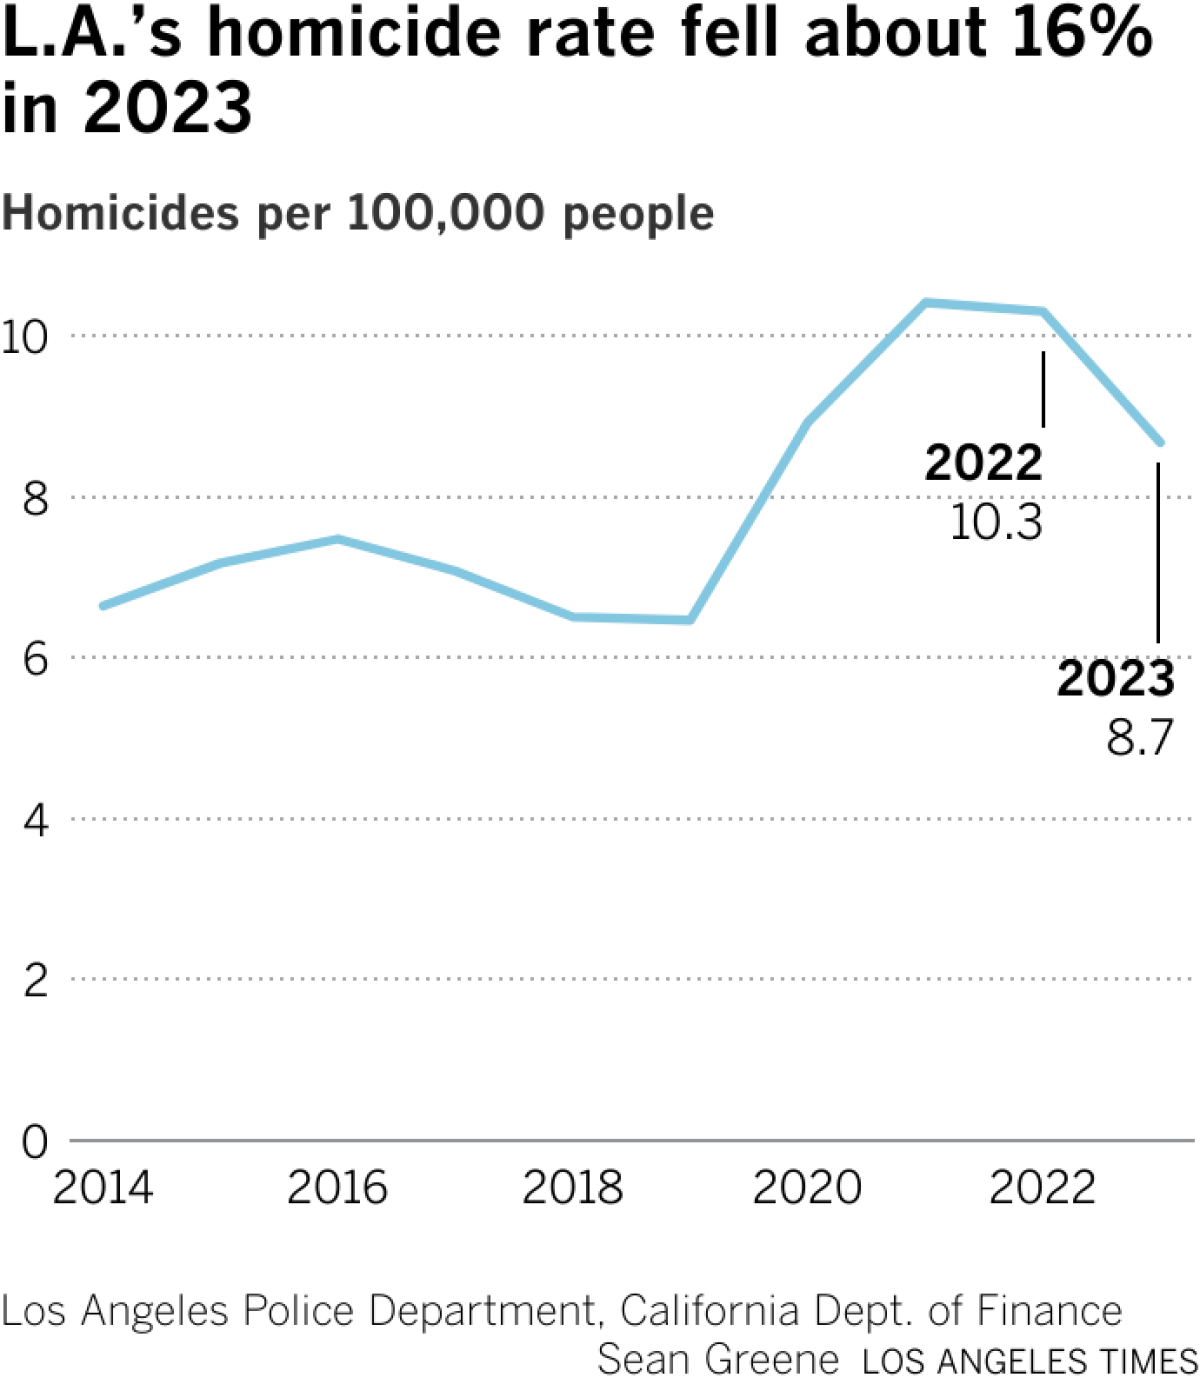 Line chart shows the Los Angeles homicide rate since 2014. The rate peaked to almost 10.5 homicides per 100,000 people in 2021 and 2022, then declined to 8.7 in 2023.